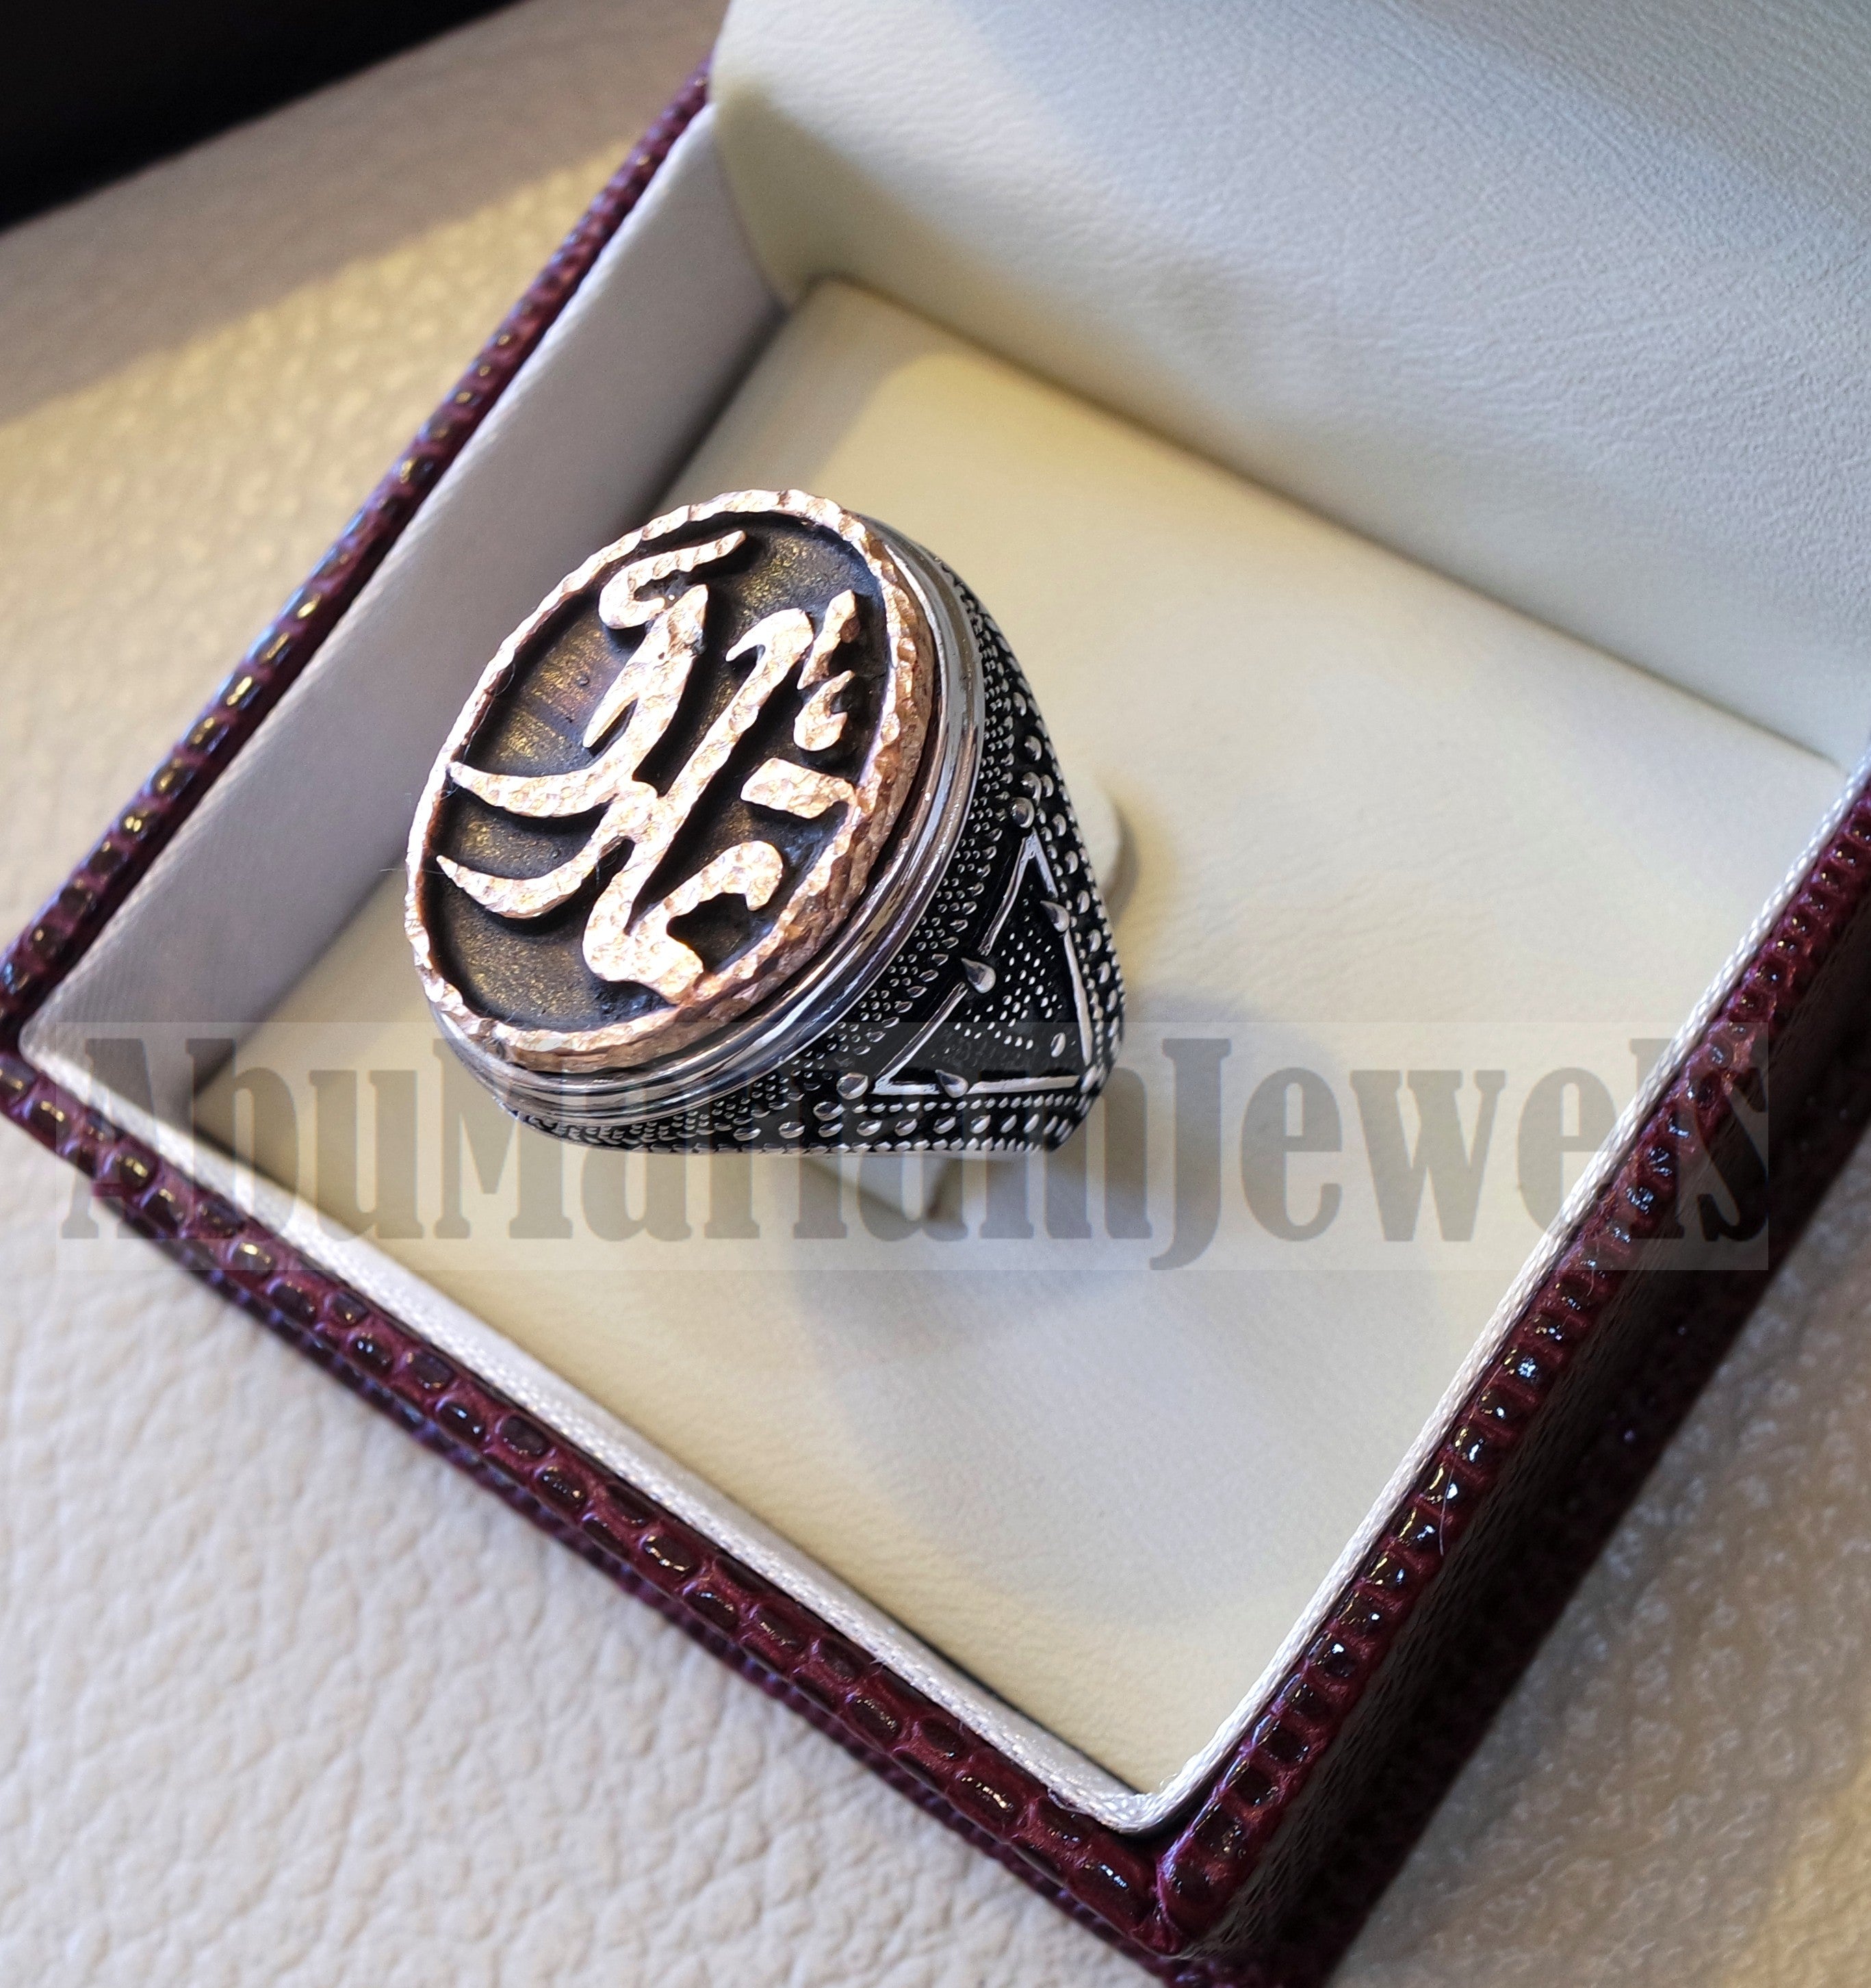 Customized Arabic calligraphy names ring personalized antique jewelry style sterling silver 925 and bronze any size TSB1005 خاتم اسم تفصيل